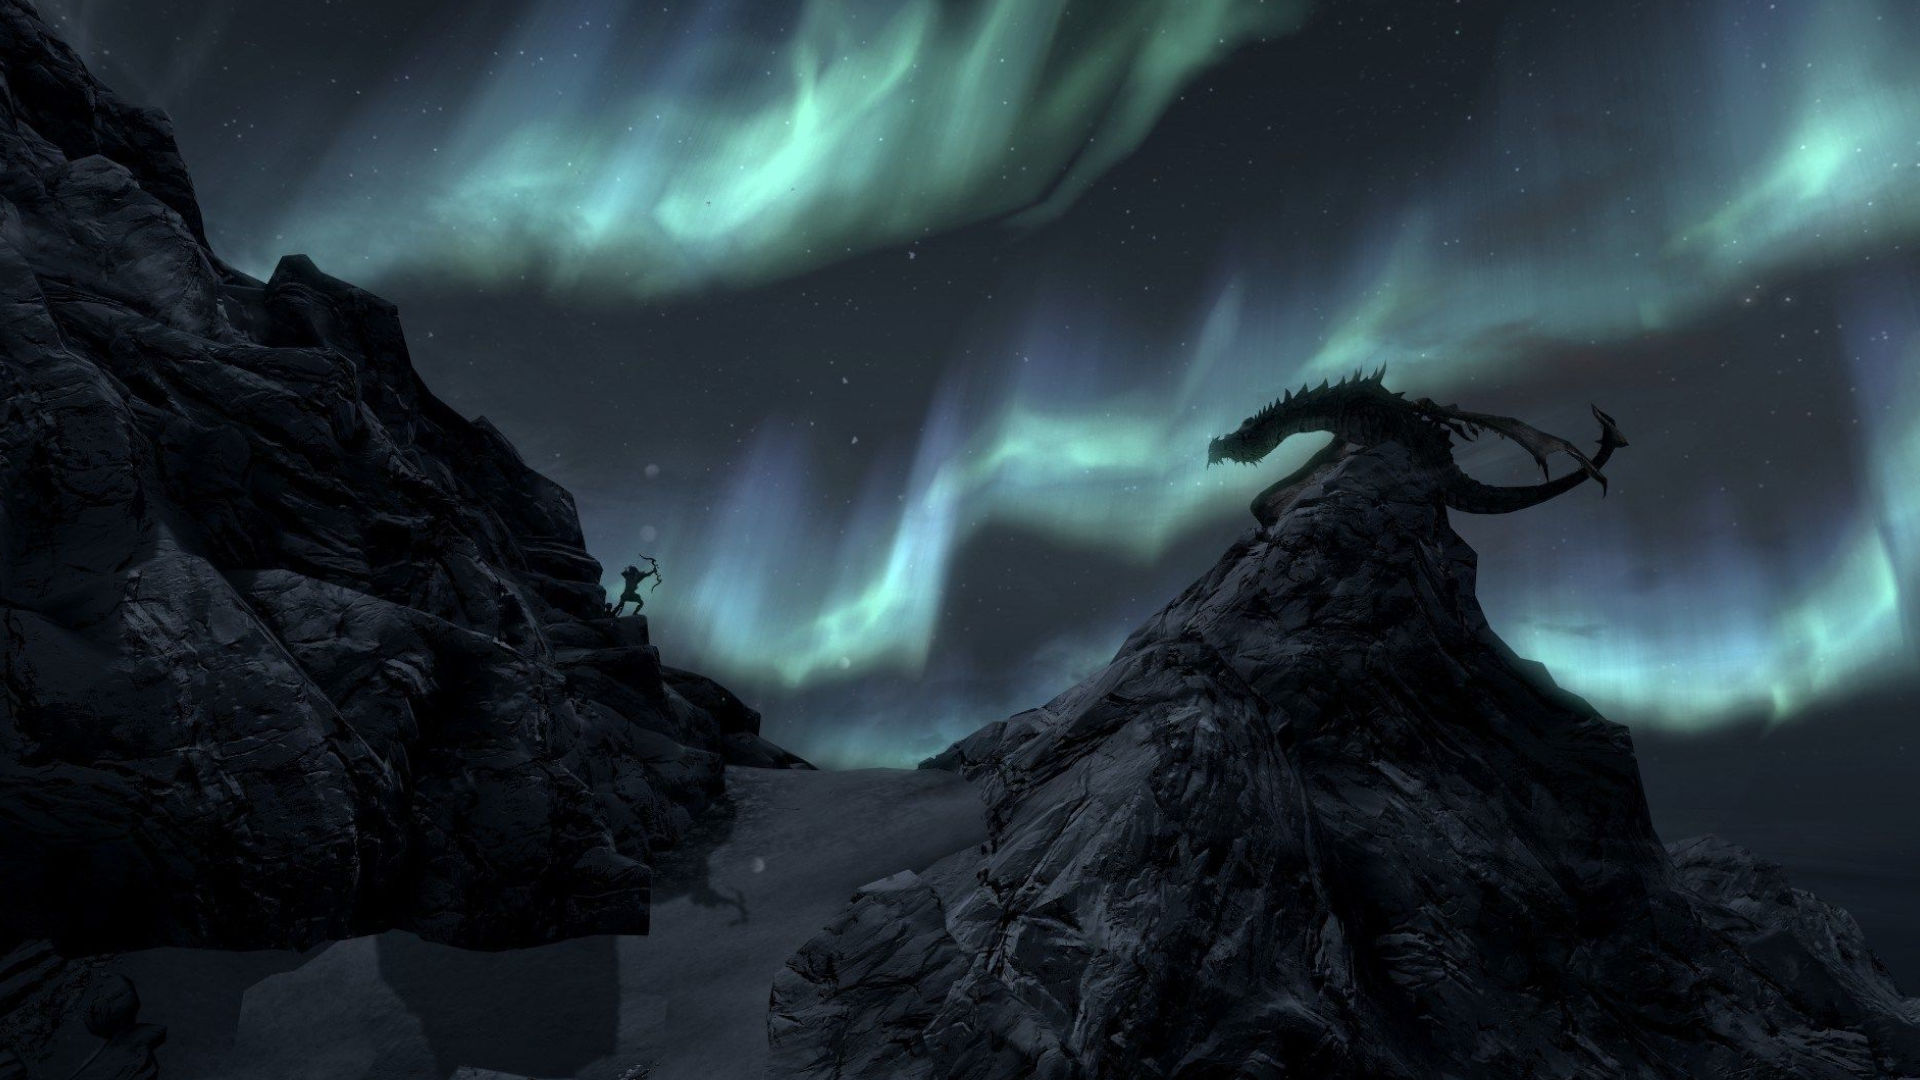 Skyrim Wallpaper 2 by thecodeofhonour on DeviantArt